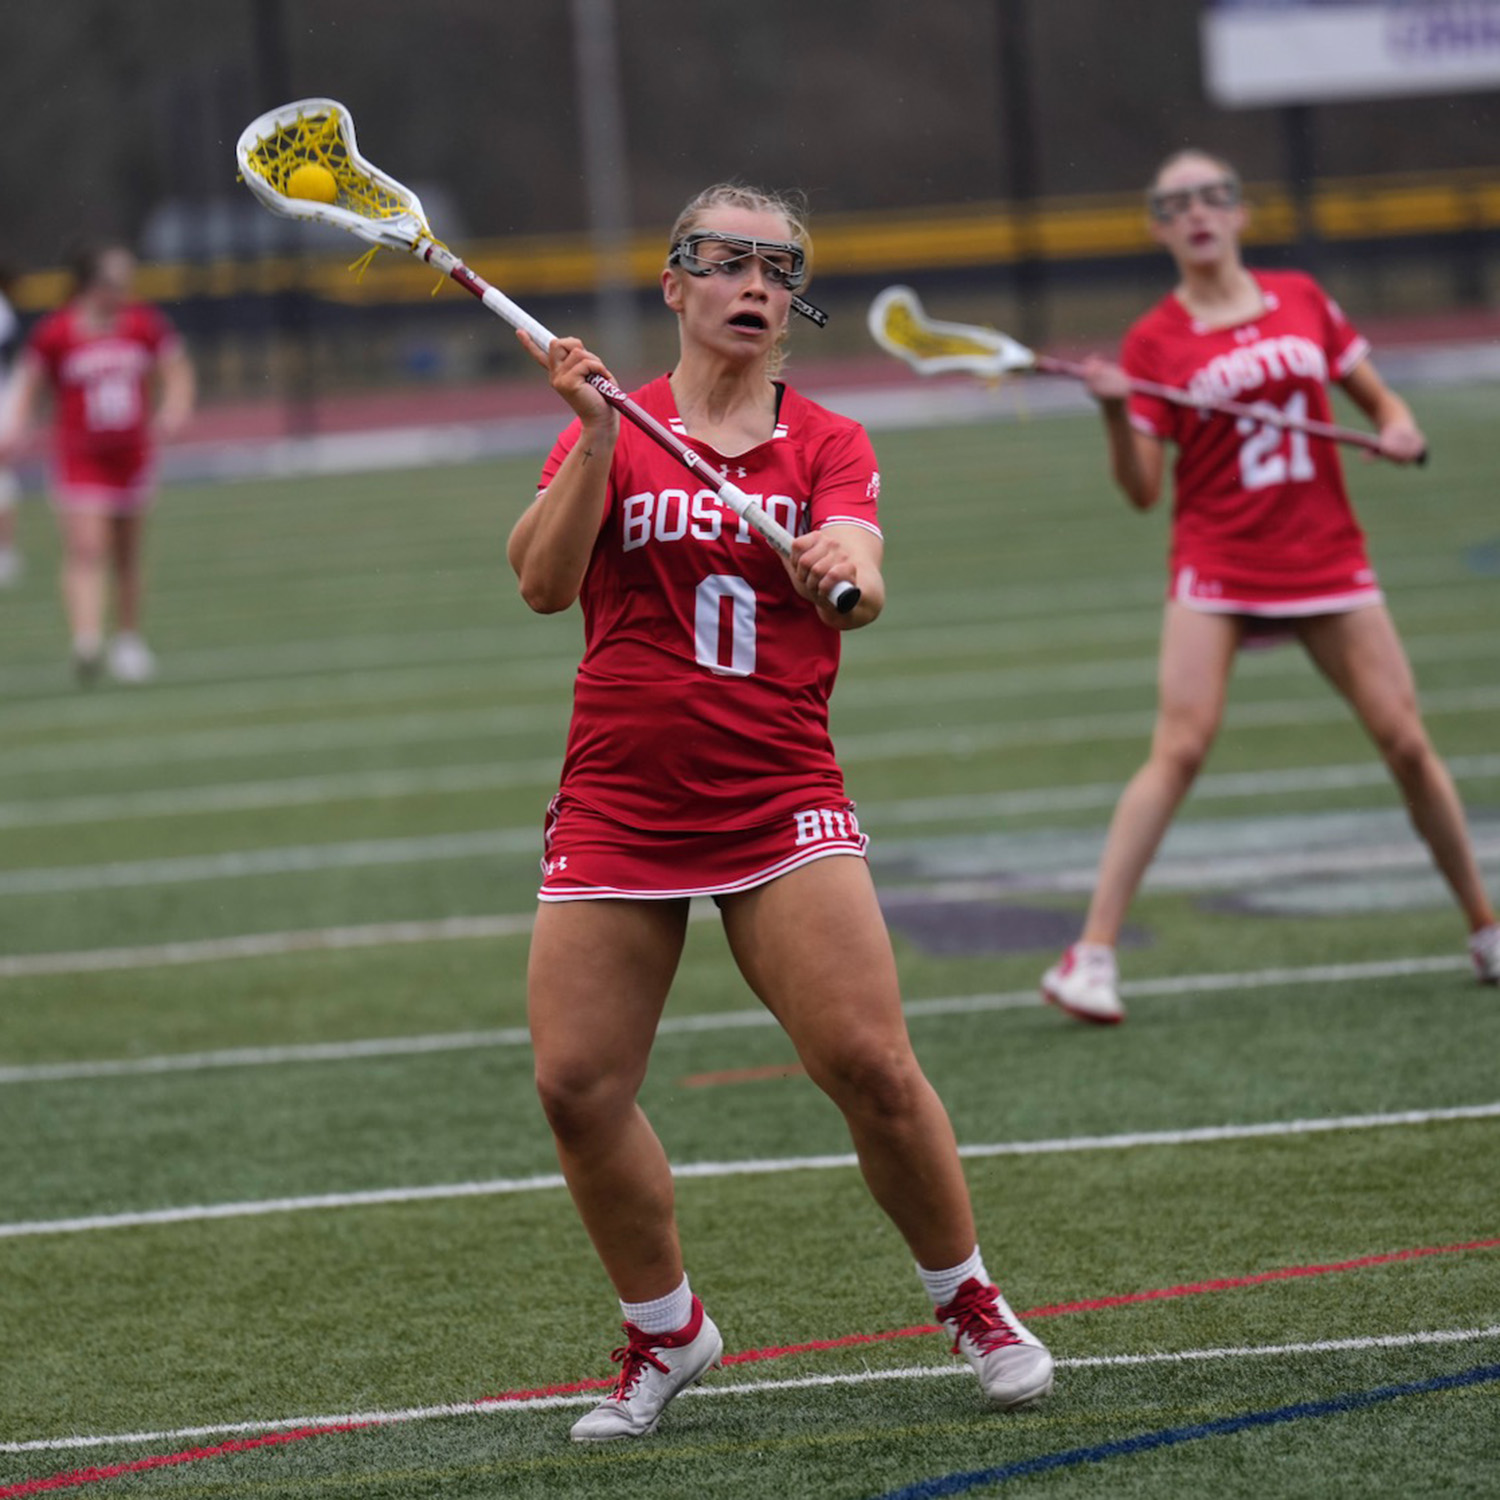 Photo: A woman's lacrosse defenseman looking to pass. She is holding a lacrosse stick and her uniform is red with white accents